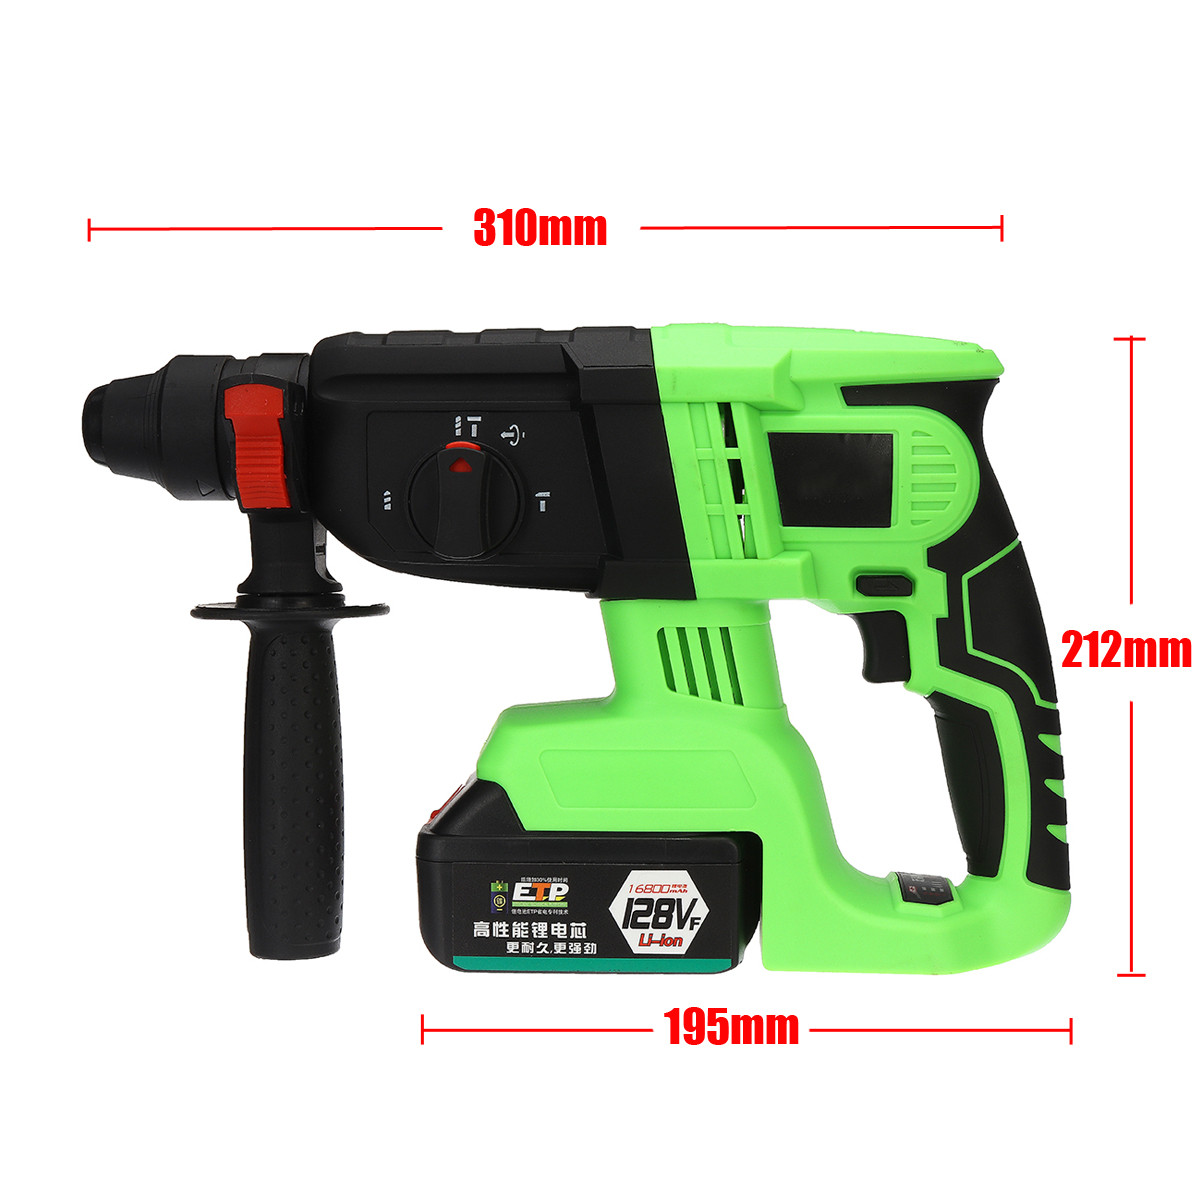 128VF-16800mAh-Brushless-Electric-Cordless-Impact-Hammer-High-Torque-Drill-with-Rechargeable-Battery-1522123-5